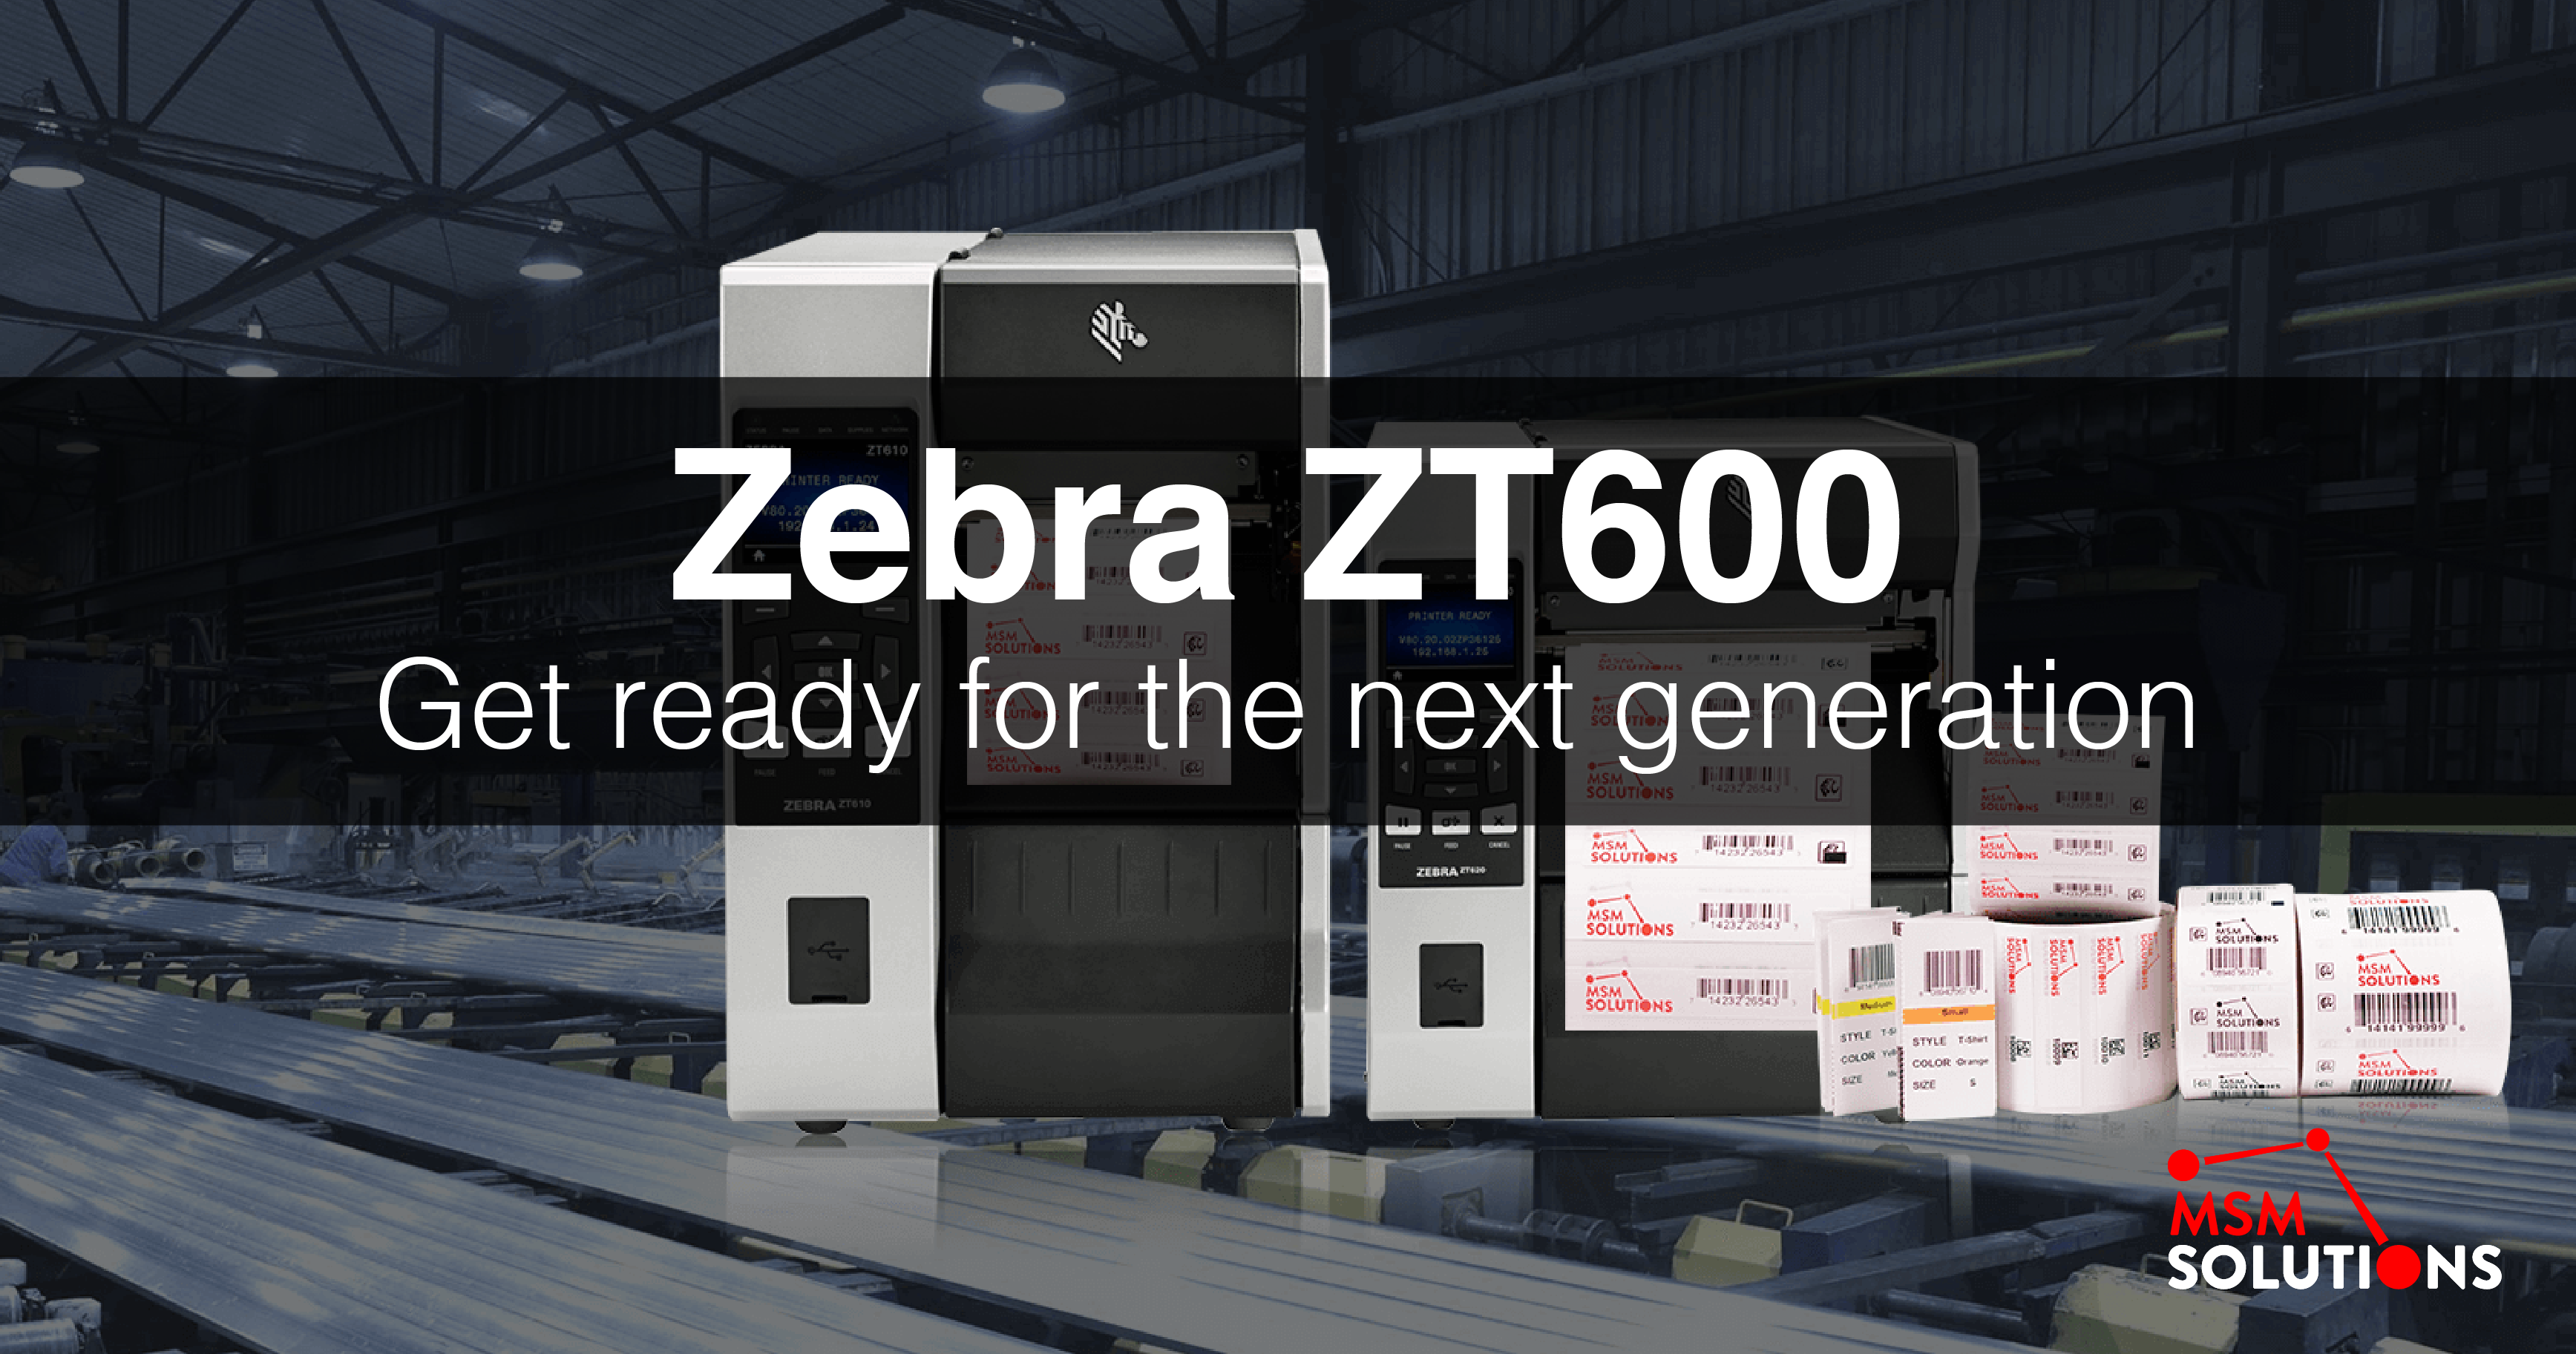 Zebra ZT600 Series Printers – Get Ready for the Next Generation